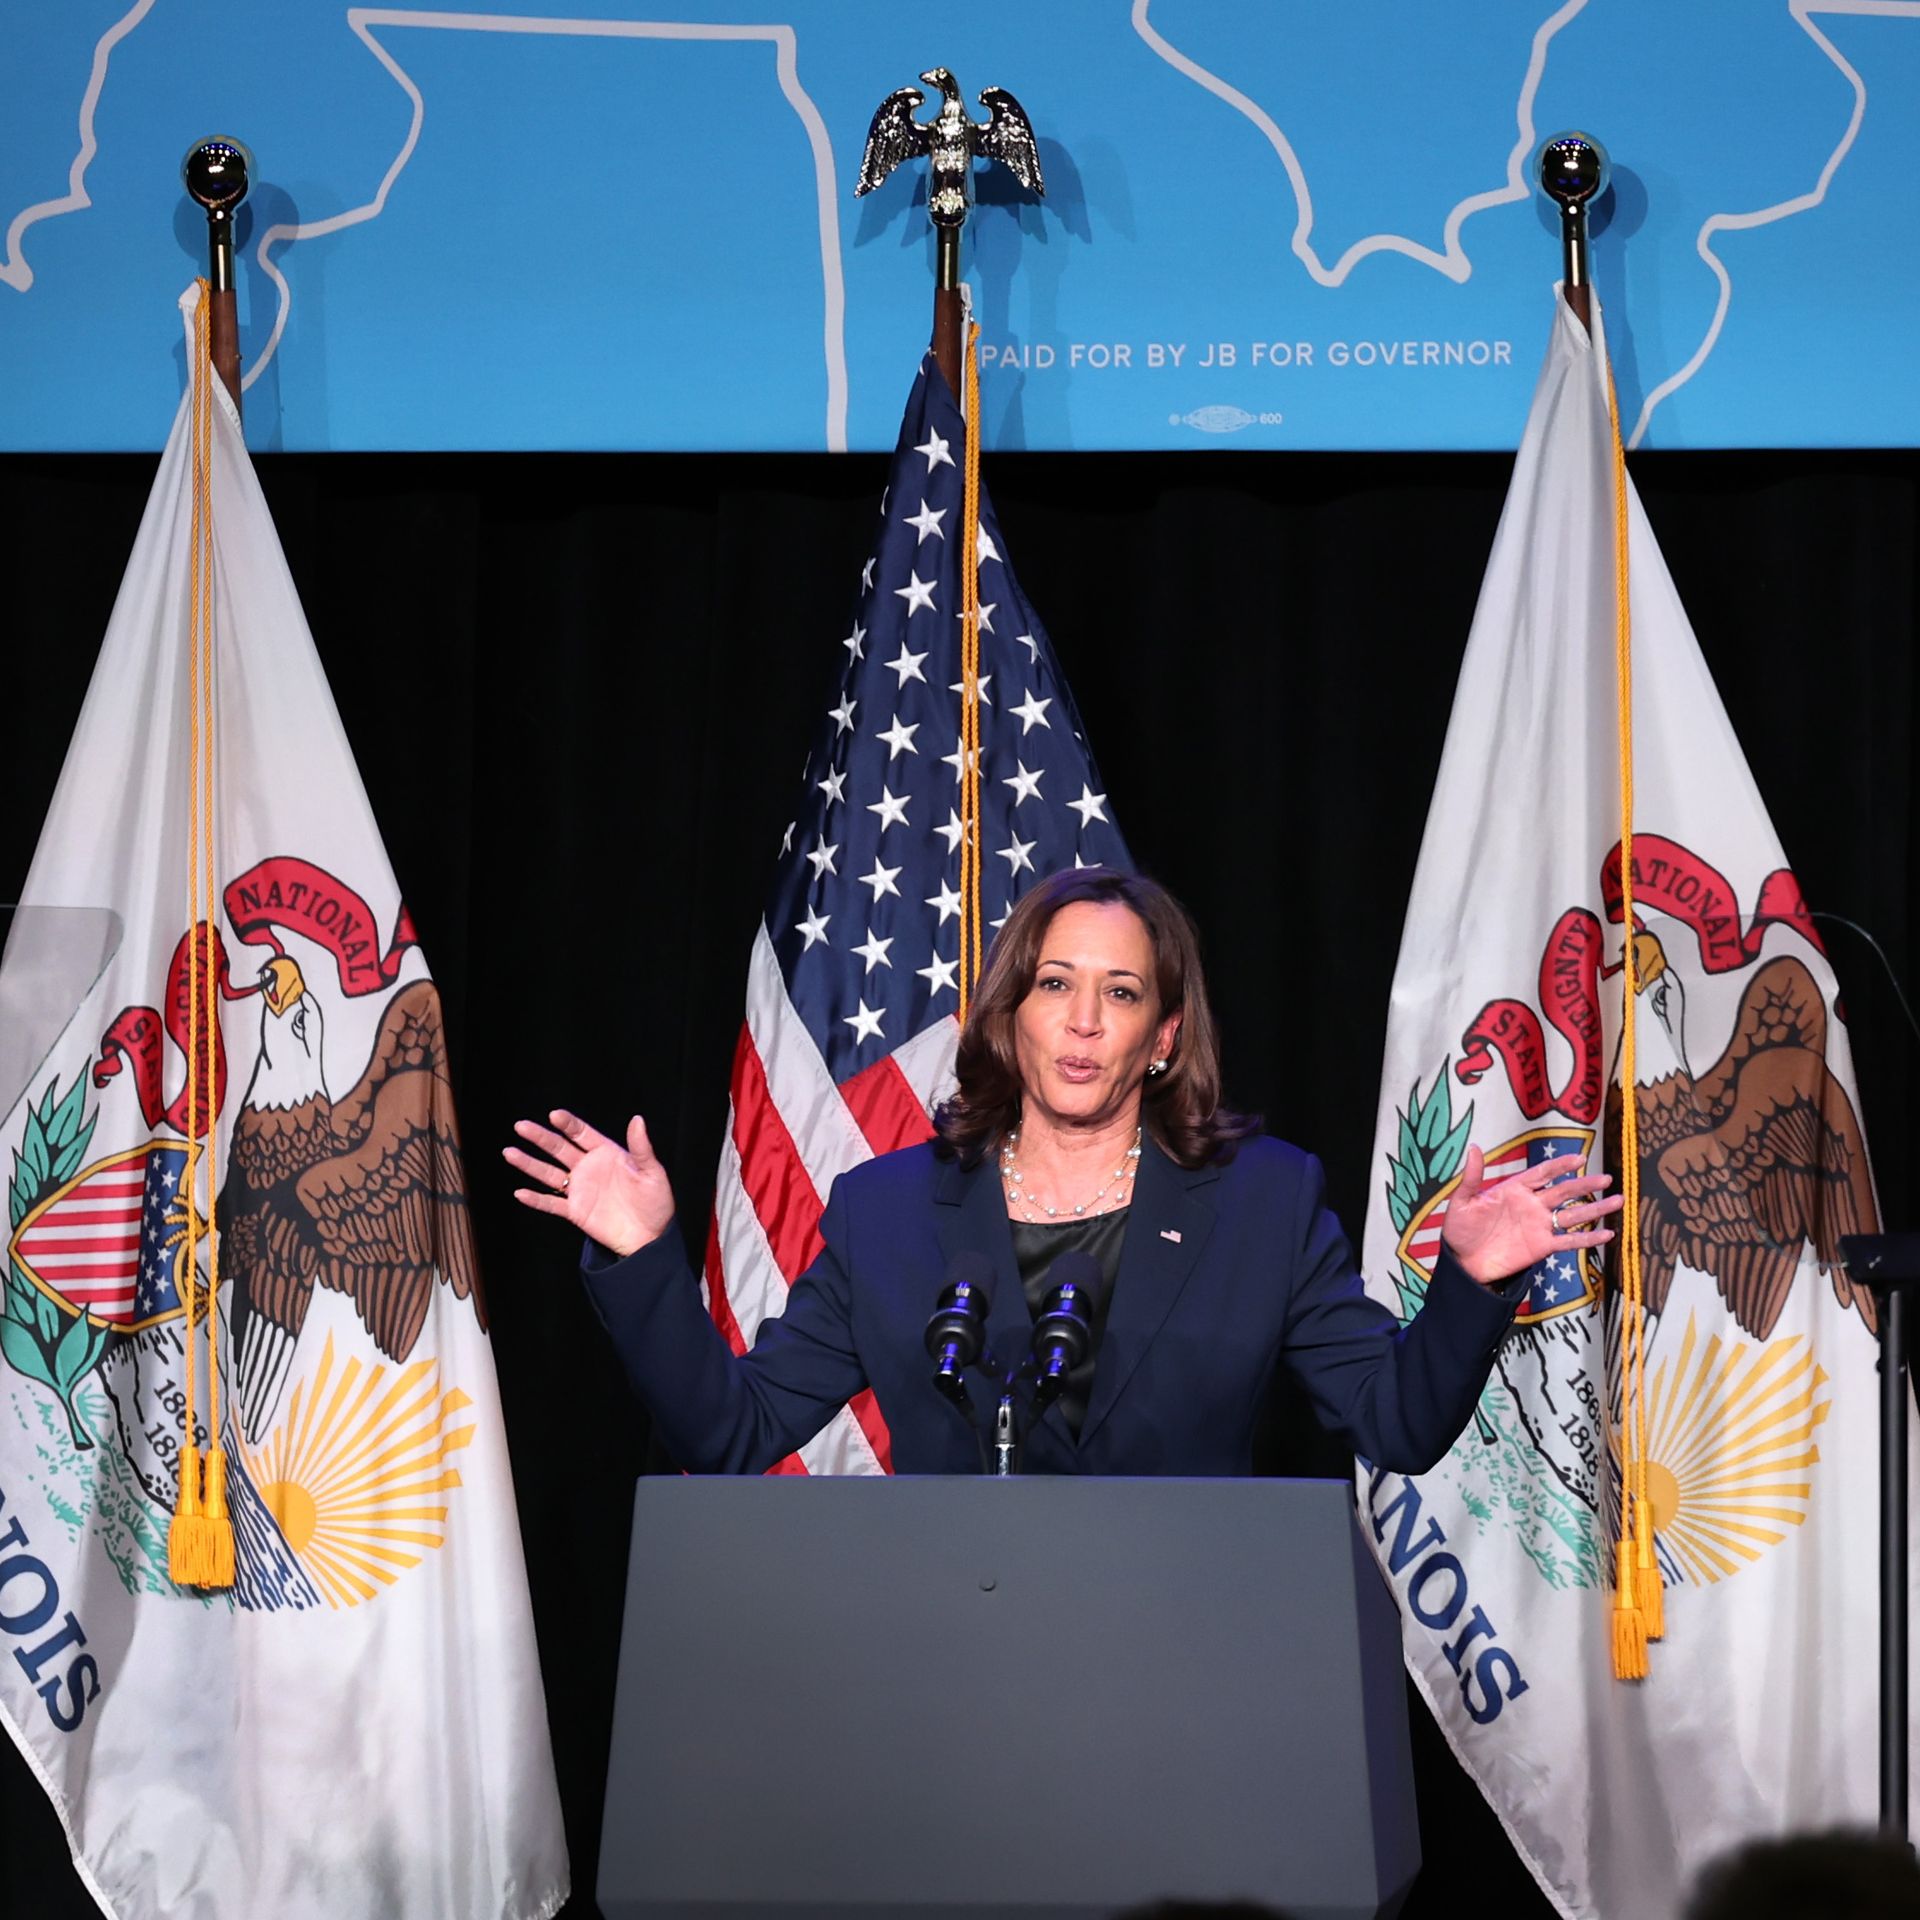 Vice President Harris in a navy blue suit standing behind a podium with the American flag behind her.